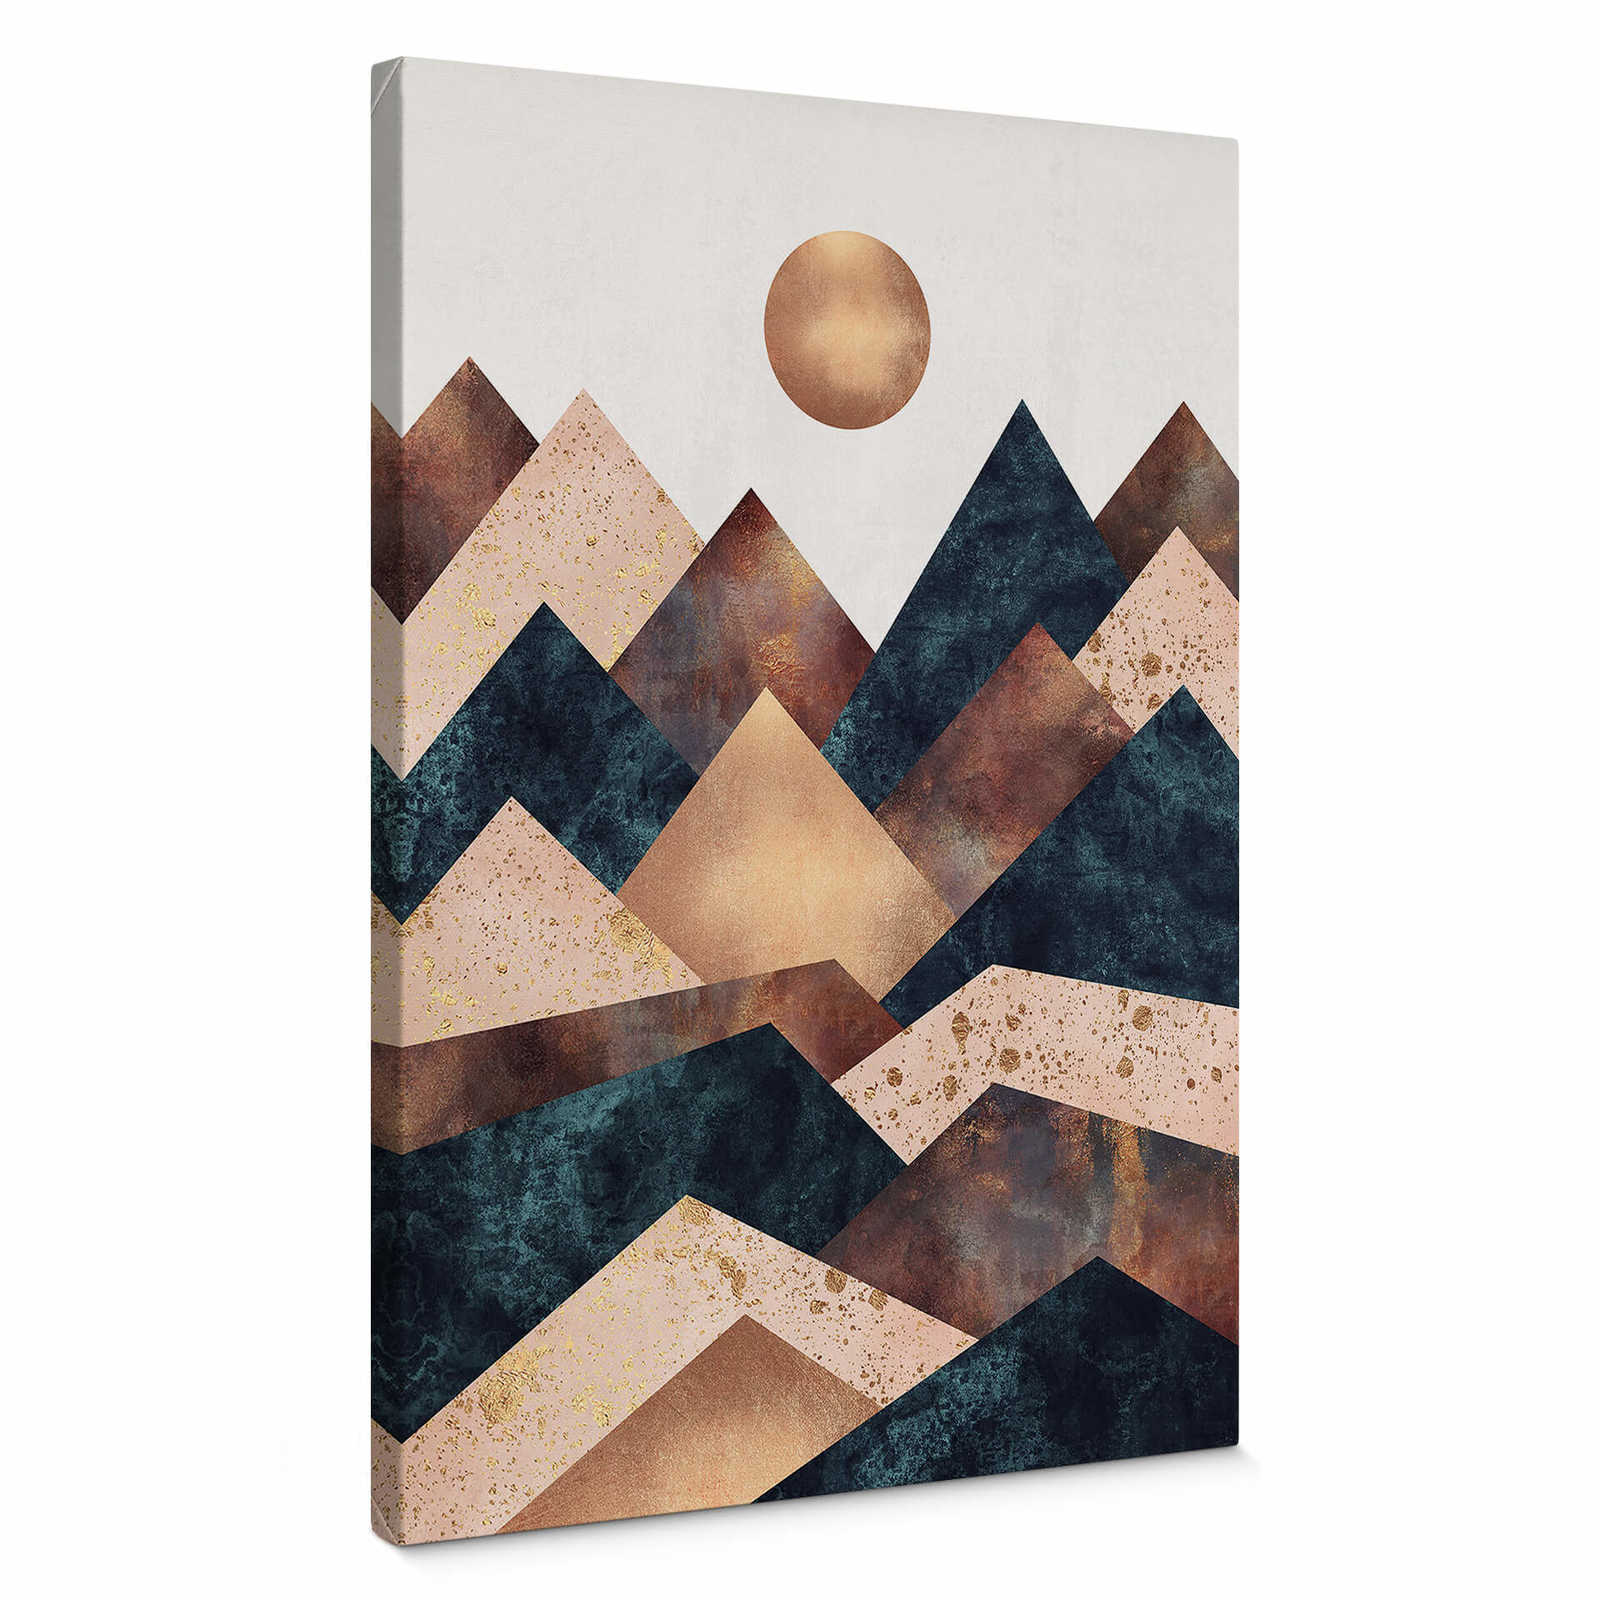         Canvas print "Autumn day in the mountains" by Fredriksson
    